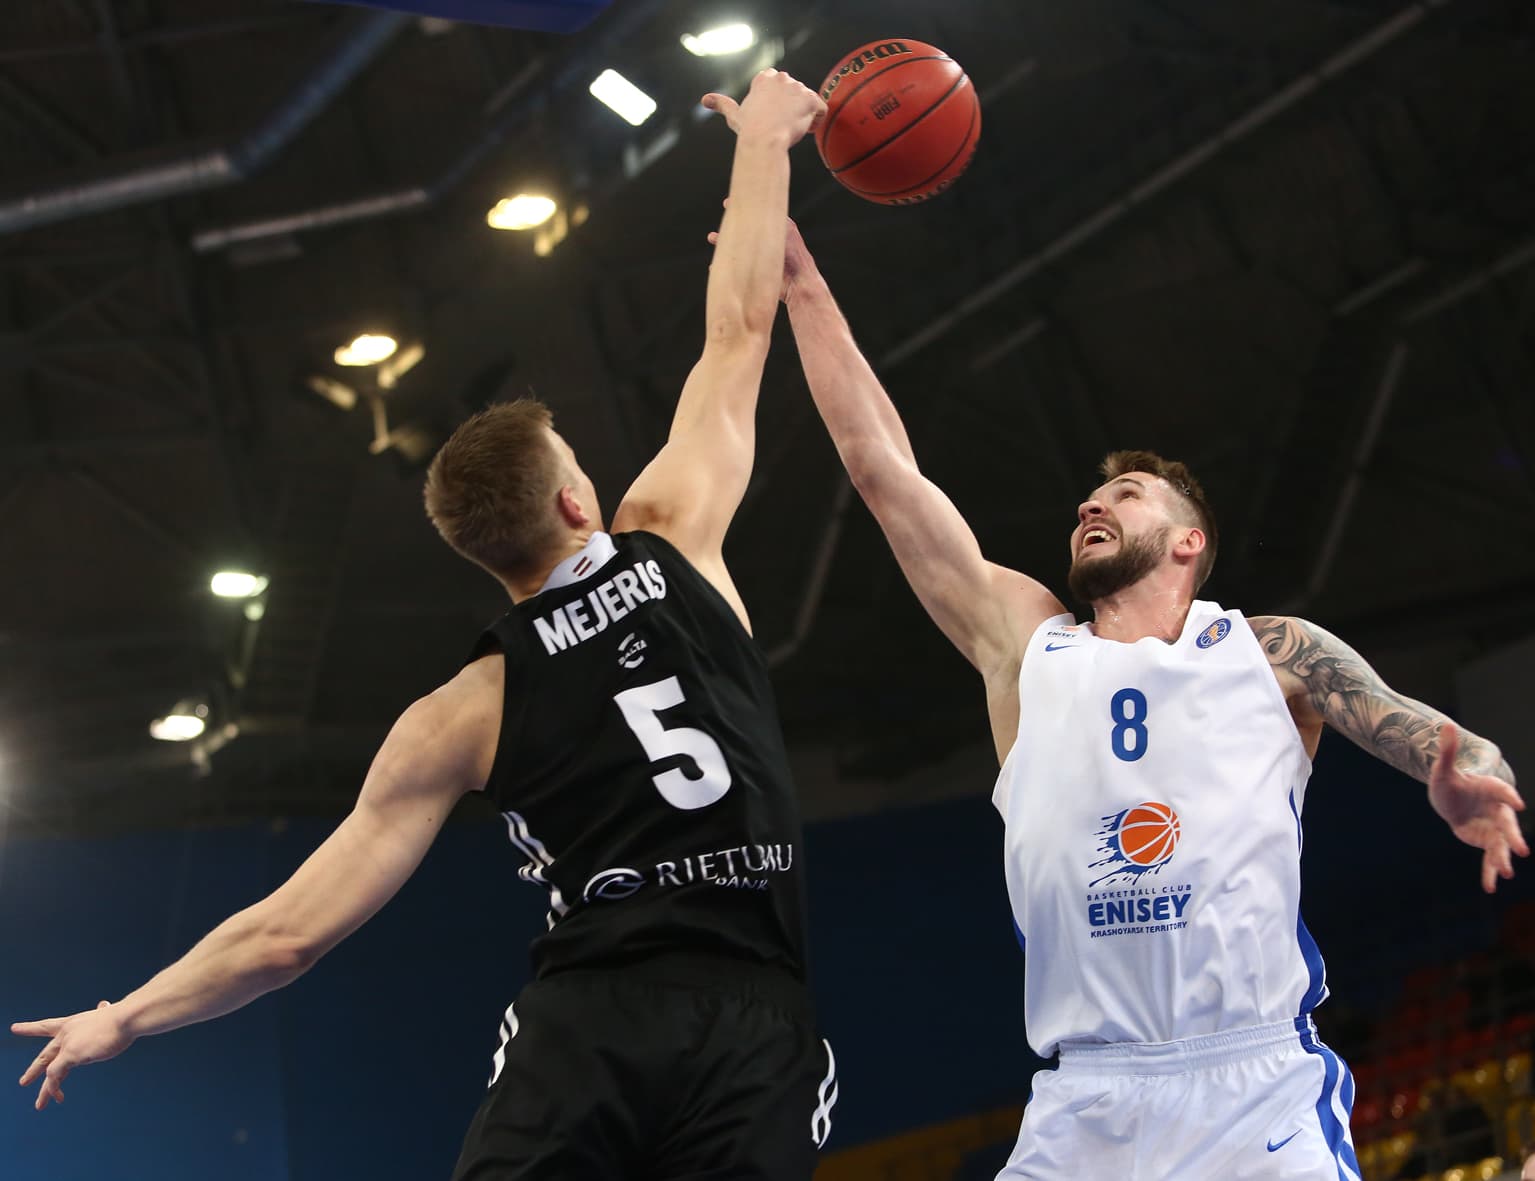 VEF Outlasts Enisey On The Road